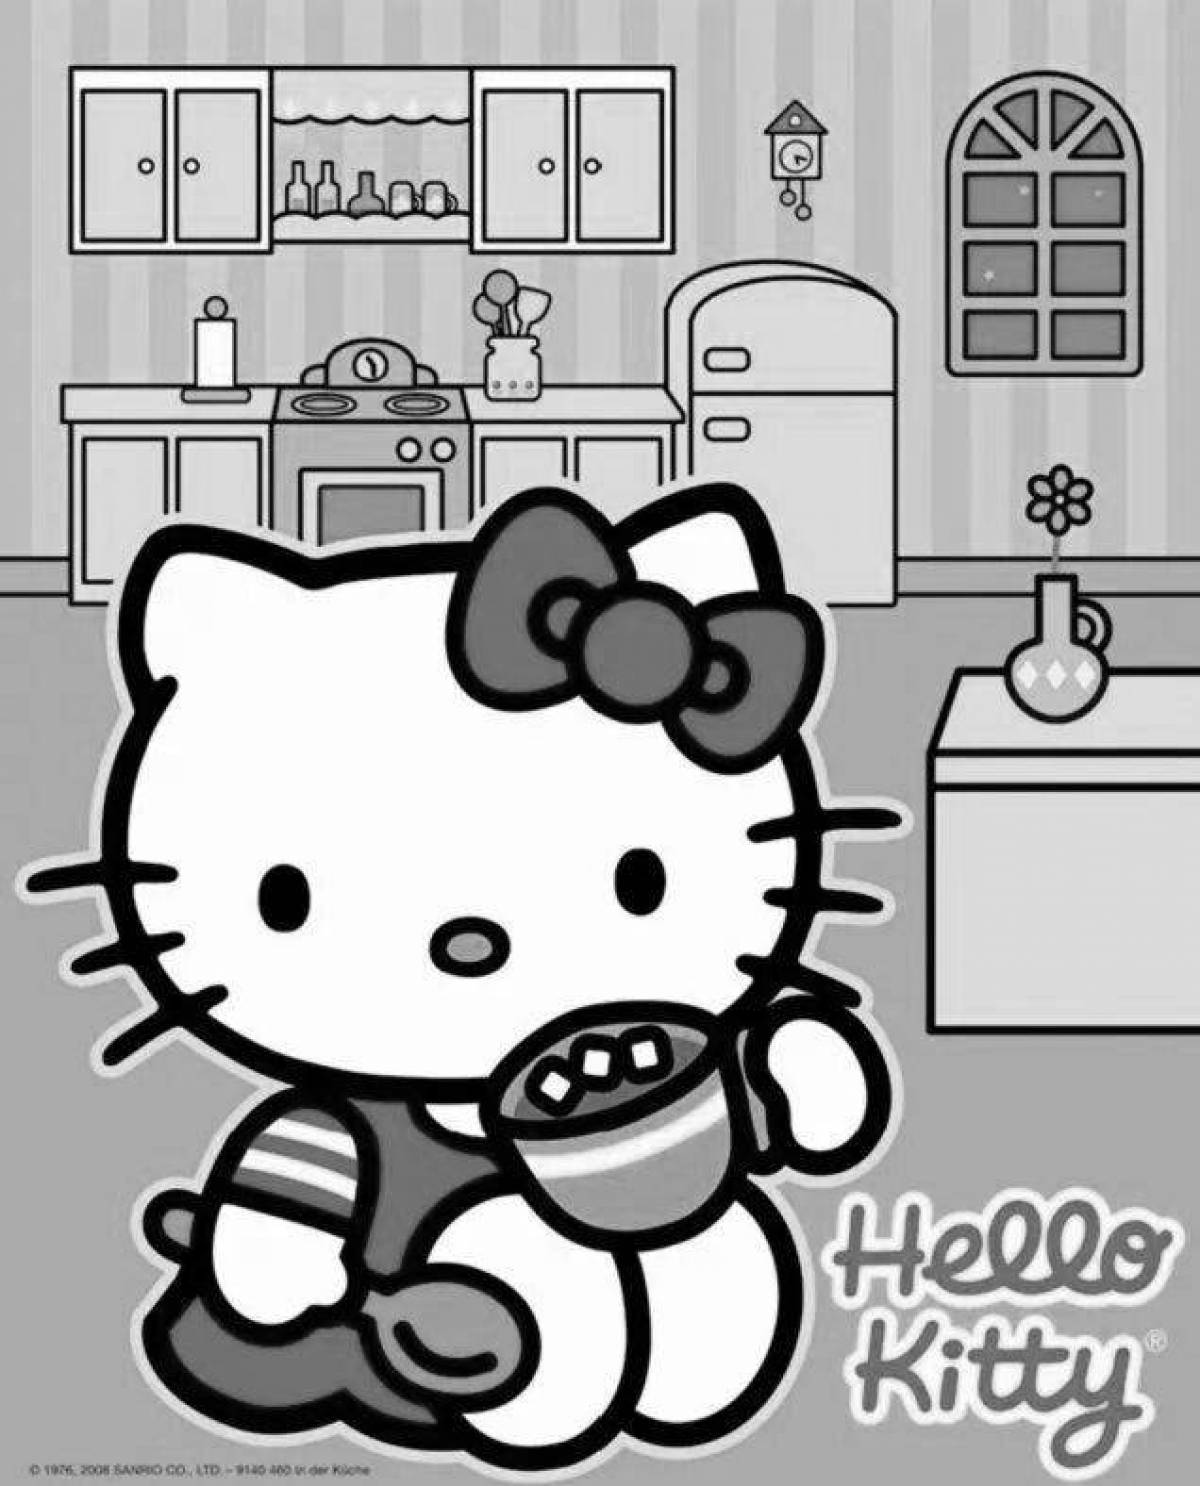 By numbers hello kitty #12